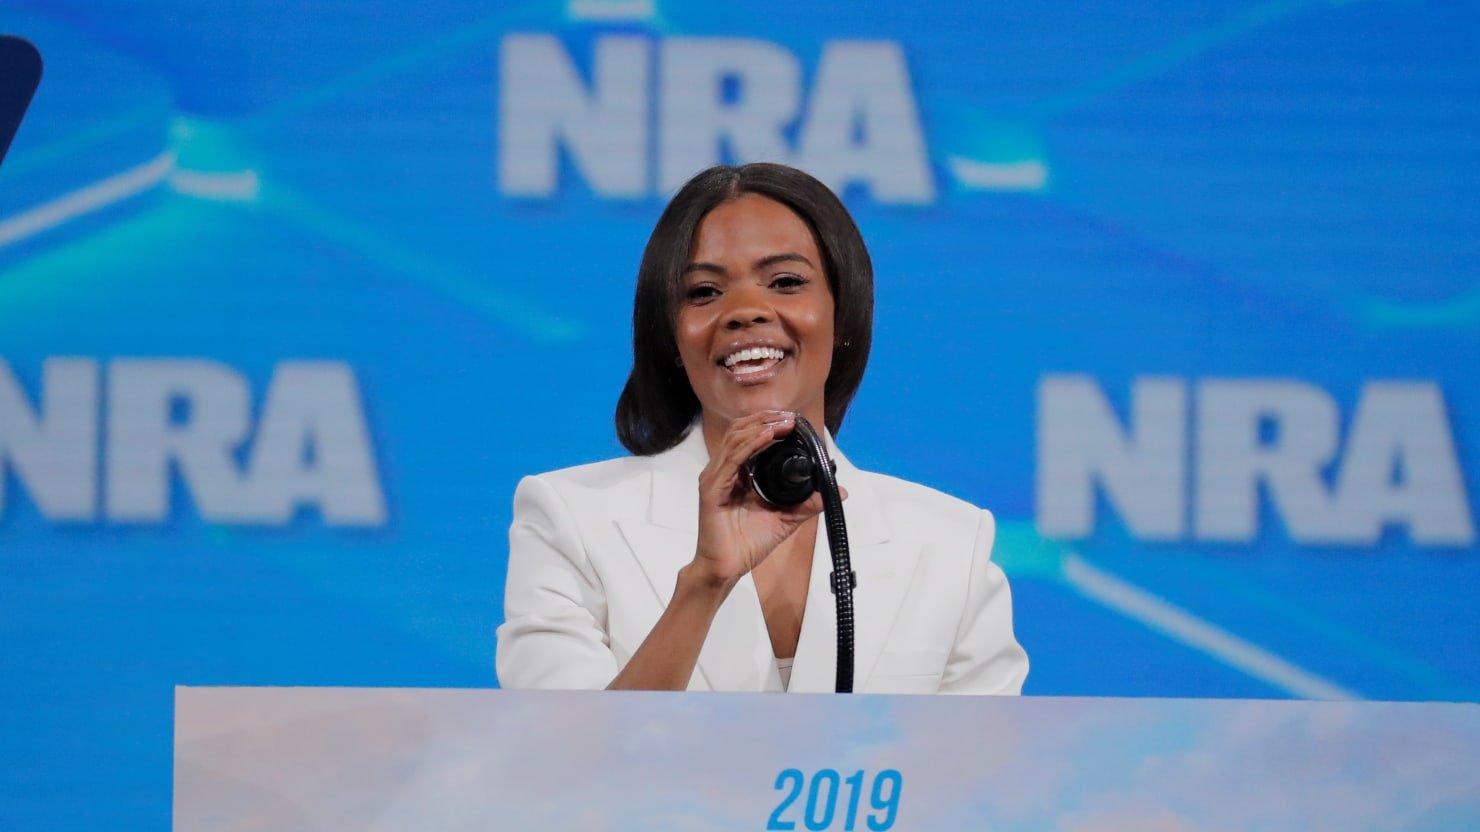 Candace Owens Is a Willing Tool of Republican Racists